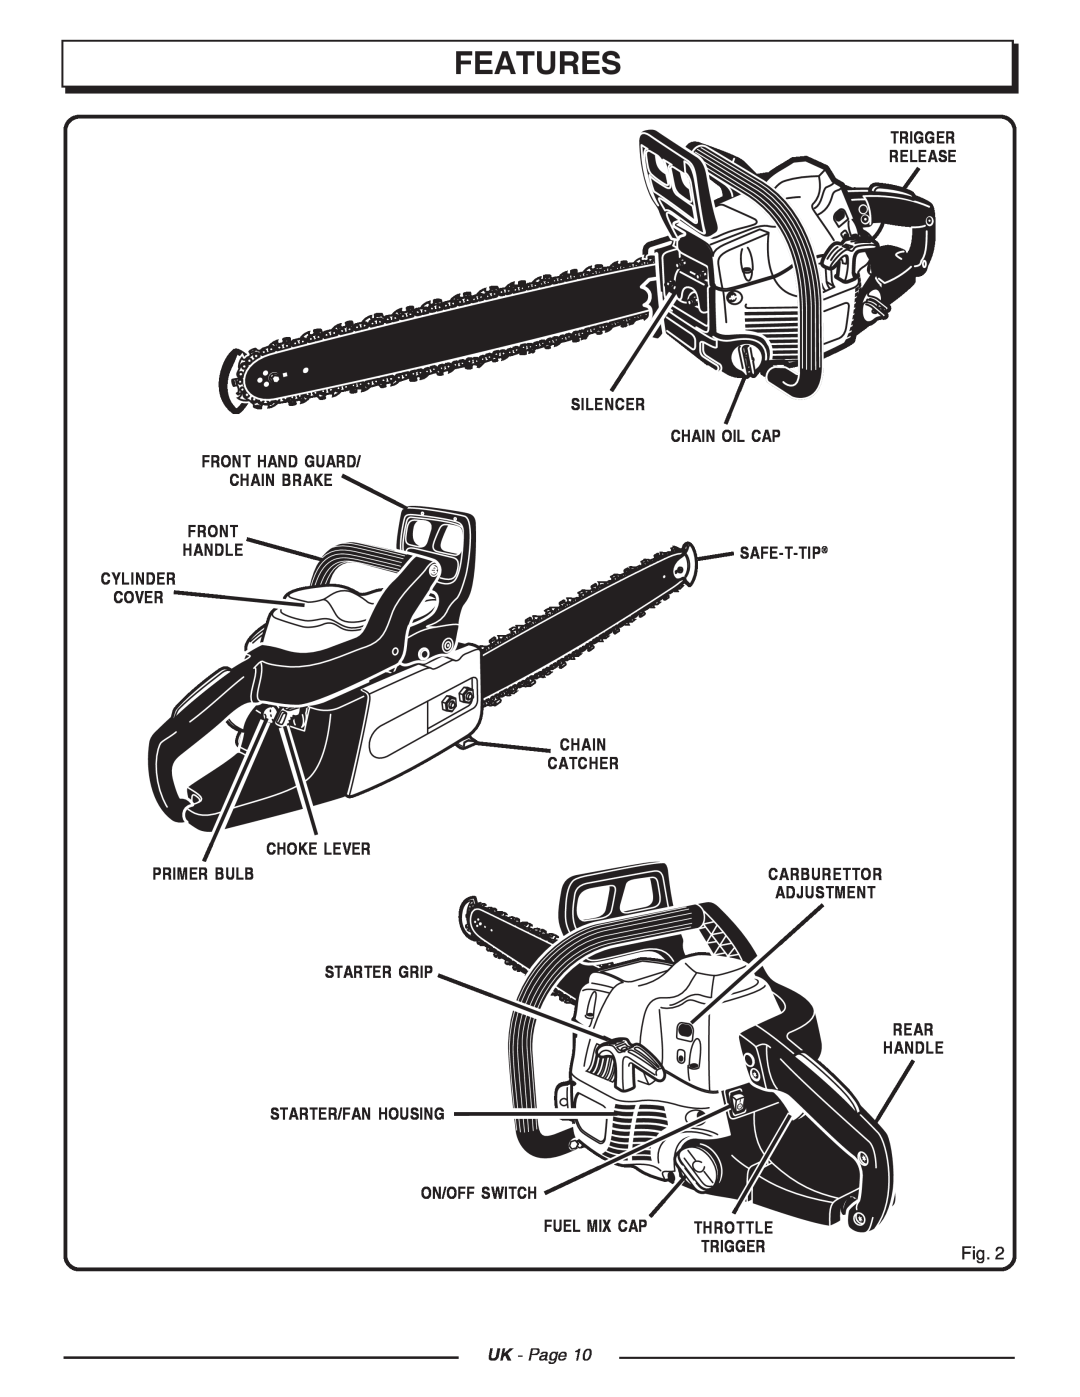 Homelite CSP3816 manual Features, Trigger Release Silencer Chain Oil Cap, Front Hand Guard Chain Brake, UK - Page, Throttle 